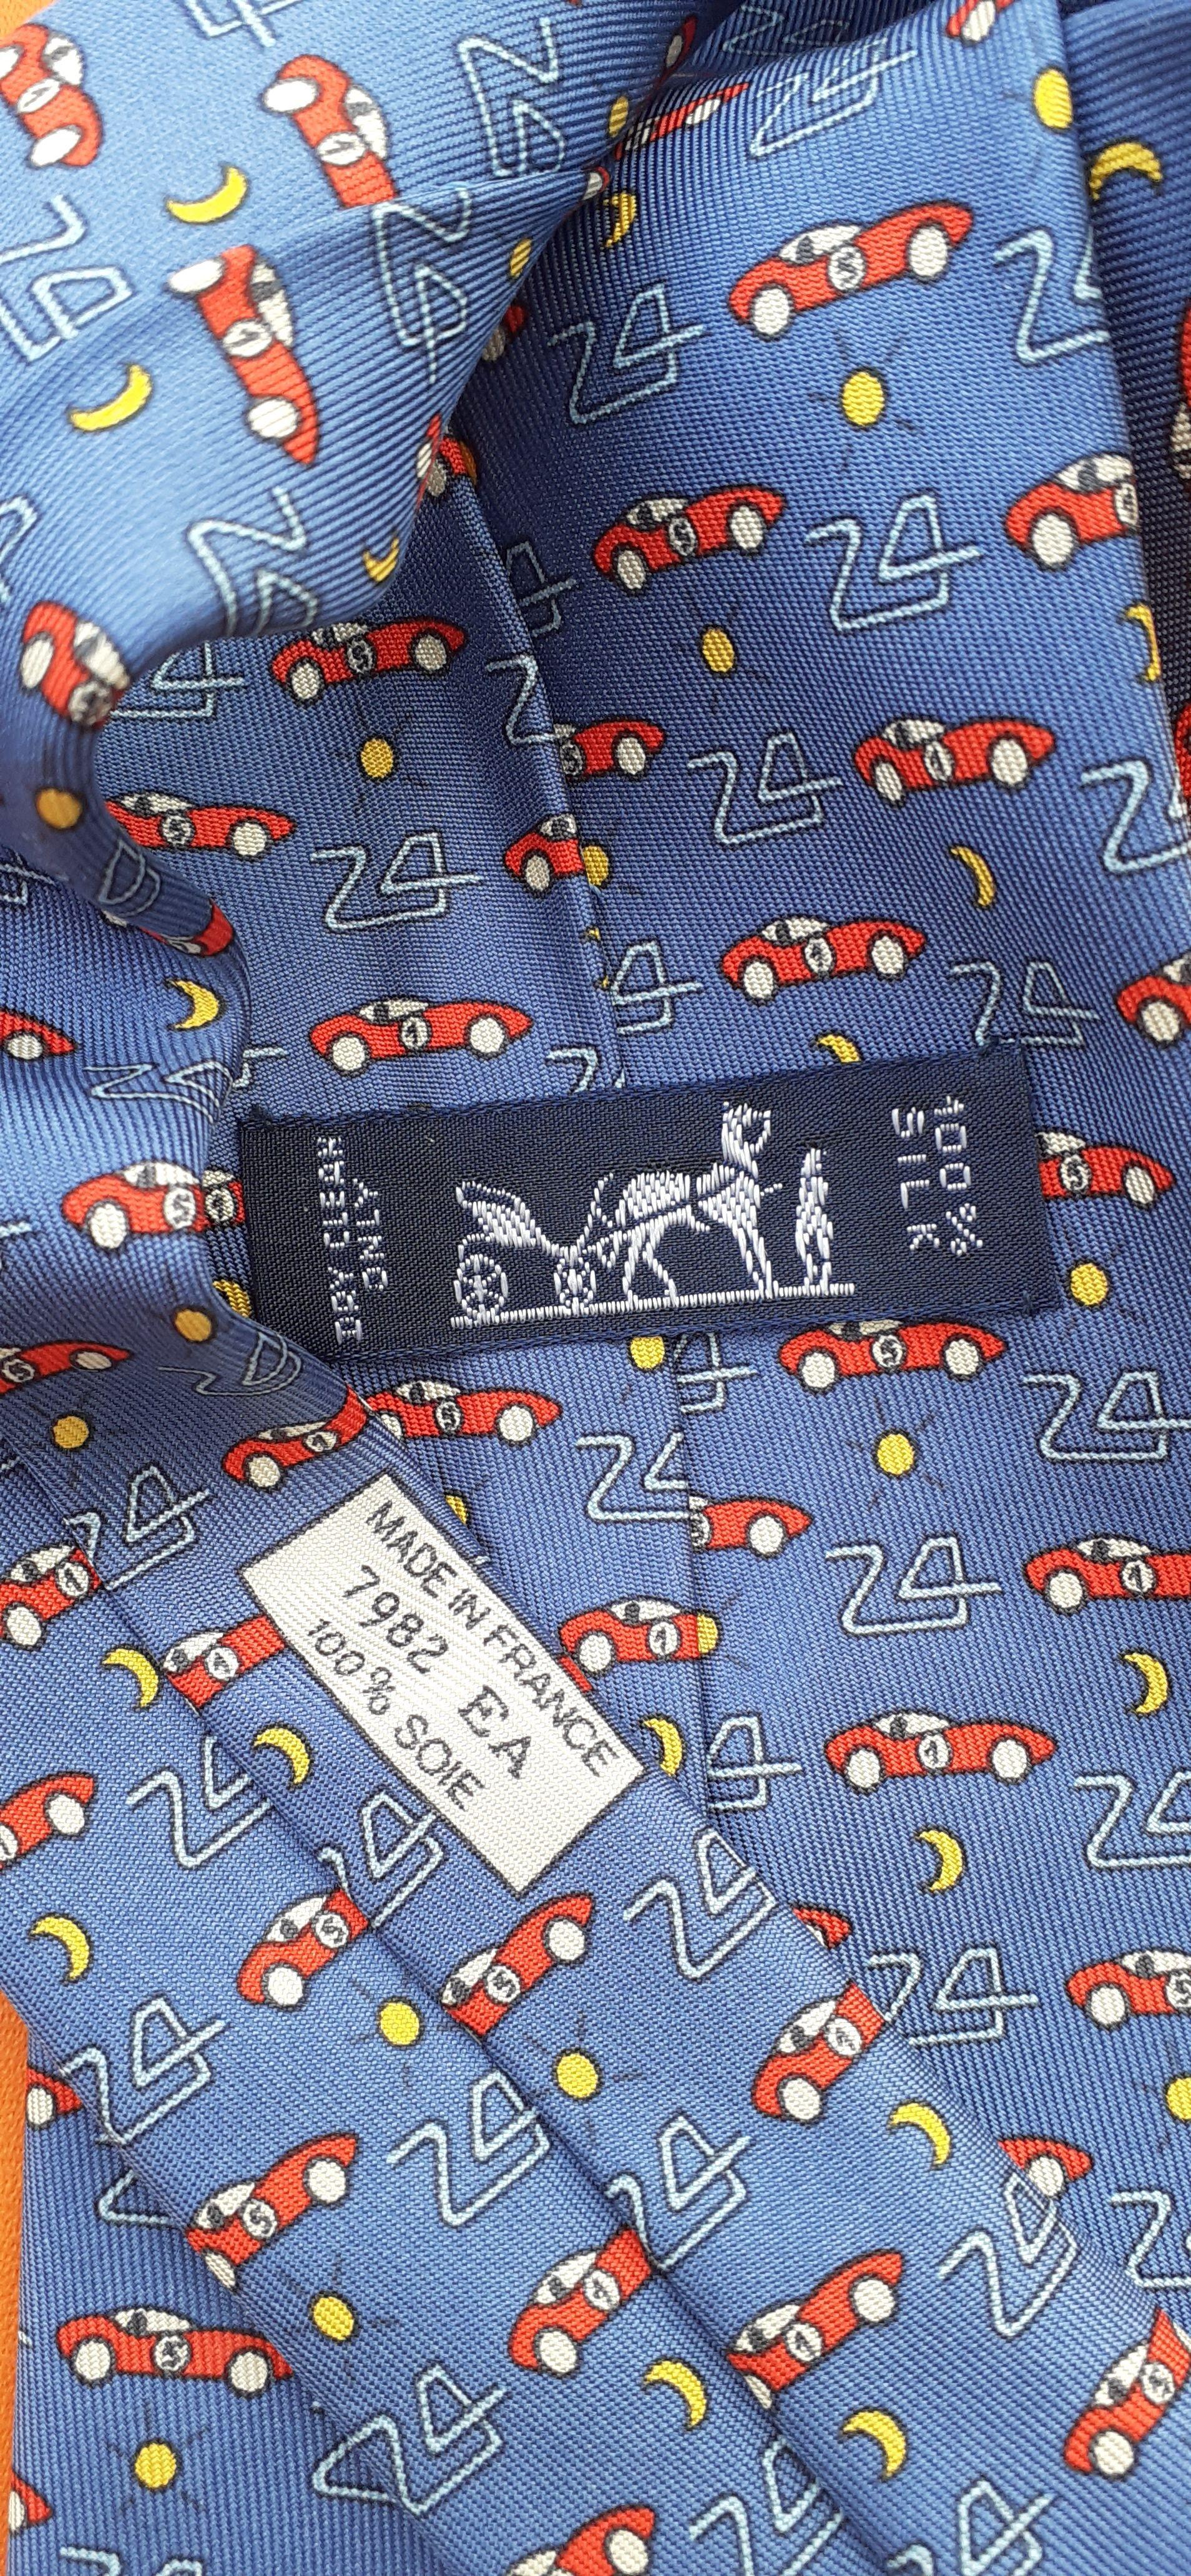 Exceptional Hermès Silk Tie Cars Print For The 24 Hours of Le Mans Race 4